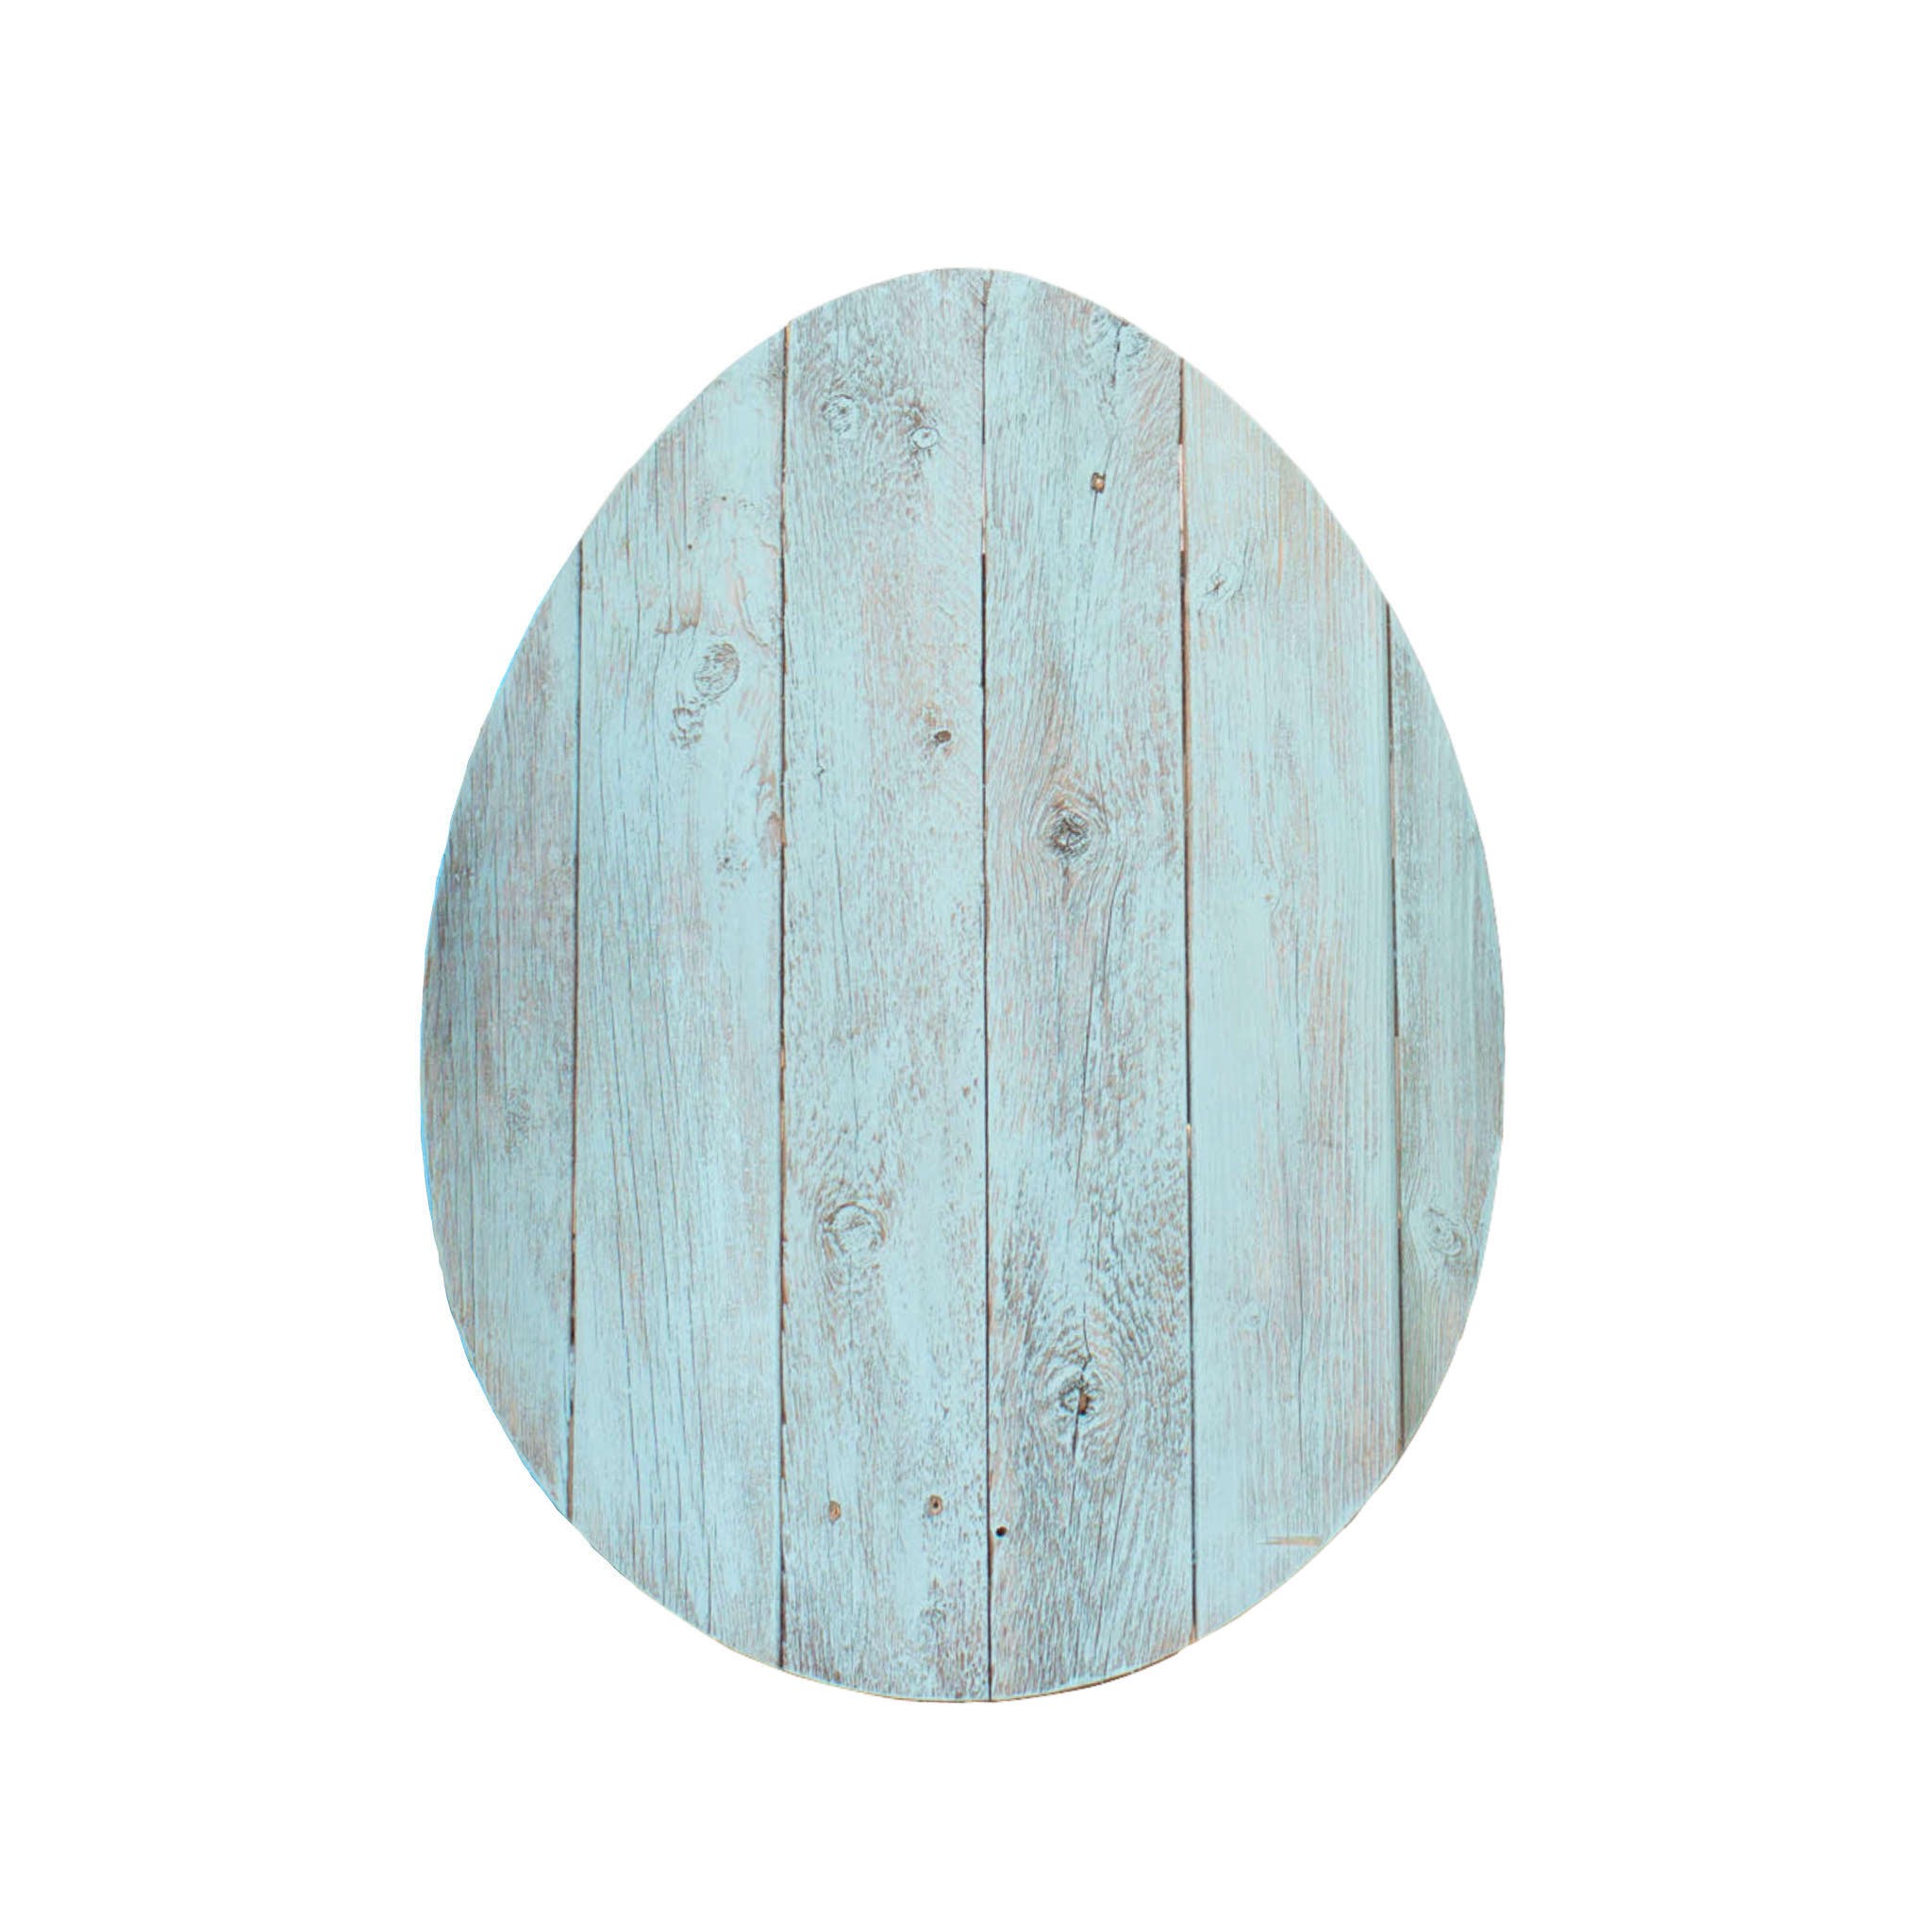 18" Rustic Farmhouse Turquoise Wooden Large Egg